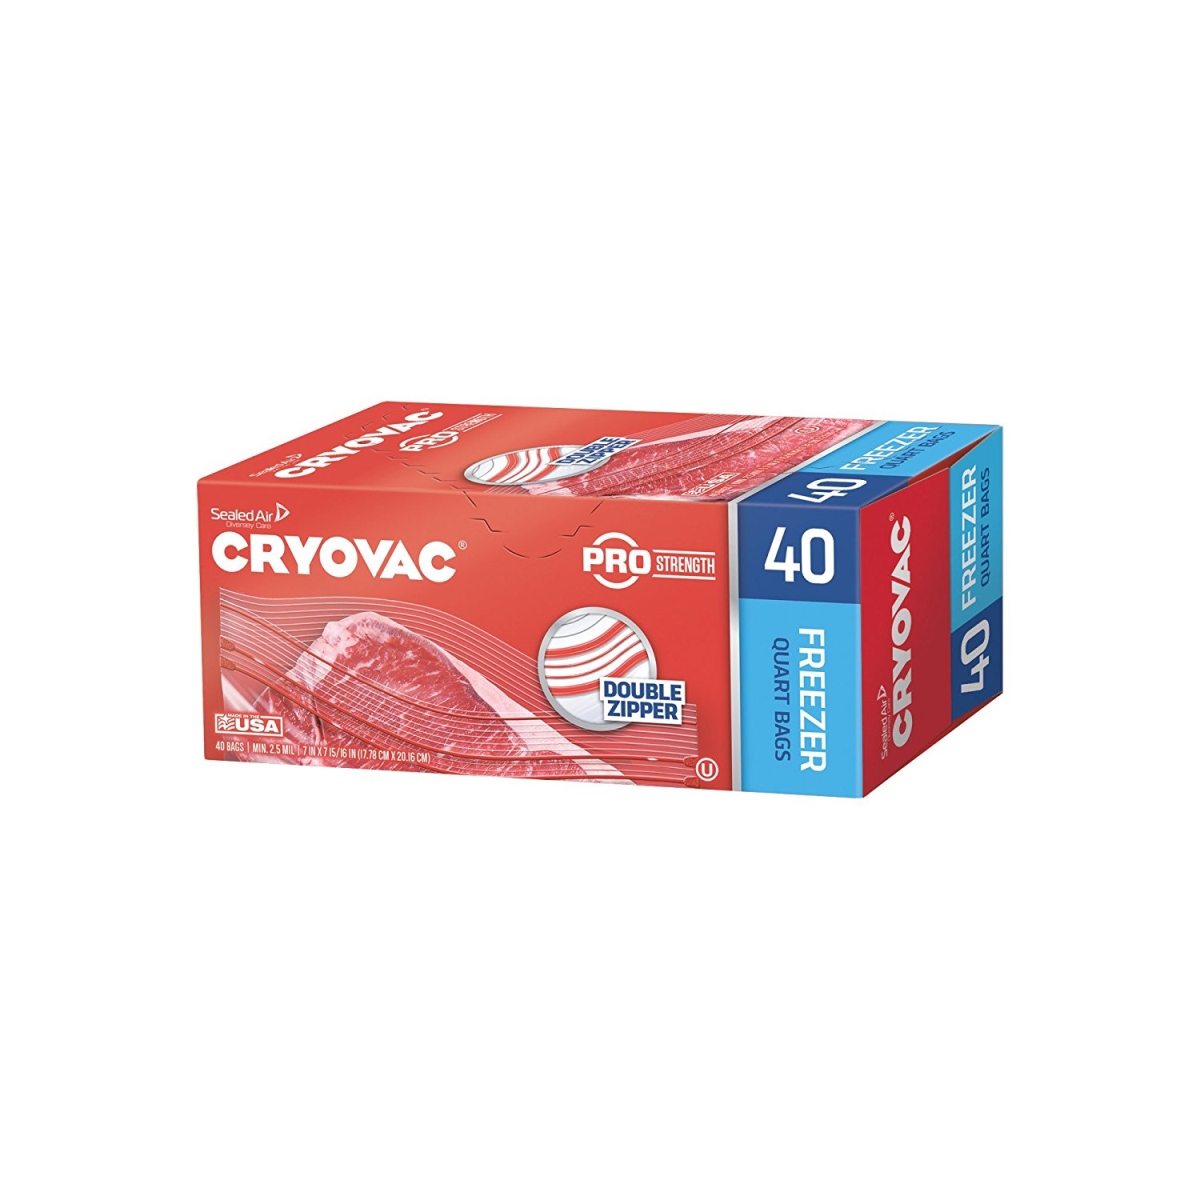 Picture of Diversey 100946913 7 x 7.93 in. 1 qt Cryovac Storage Bag Dual Zipper 360 Count